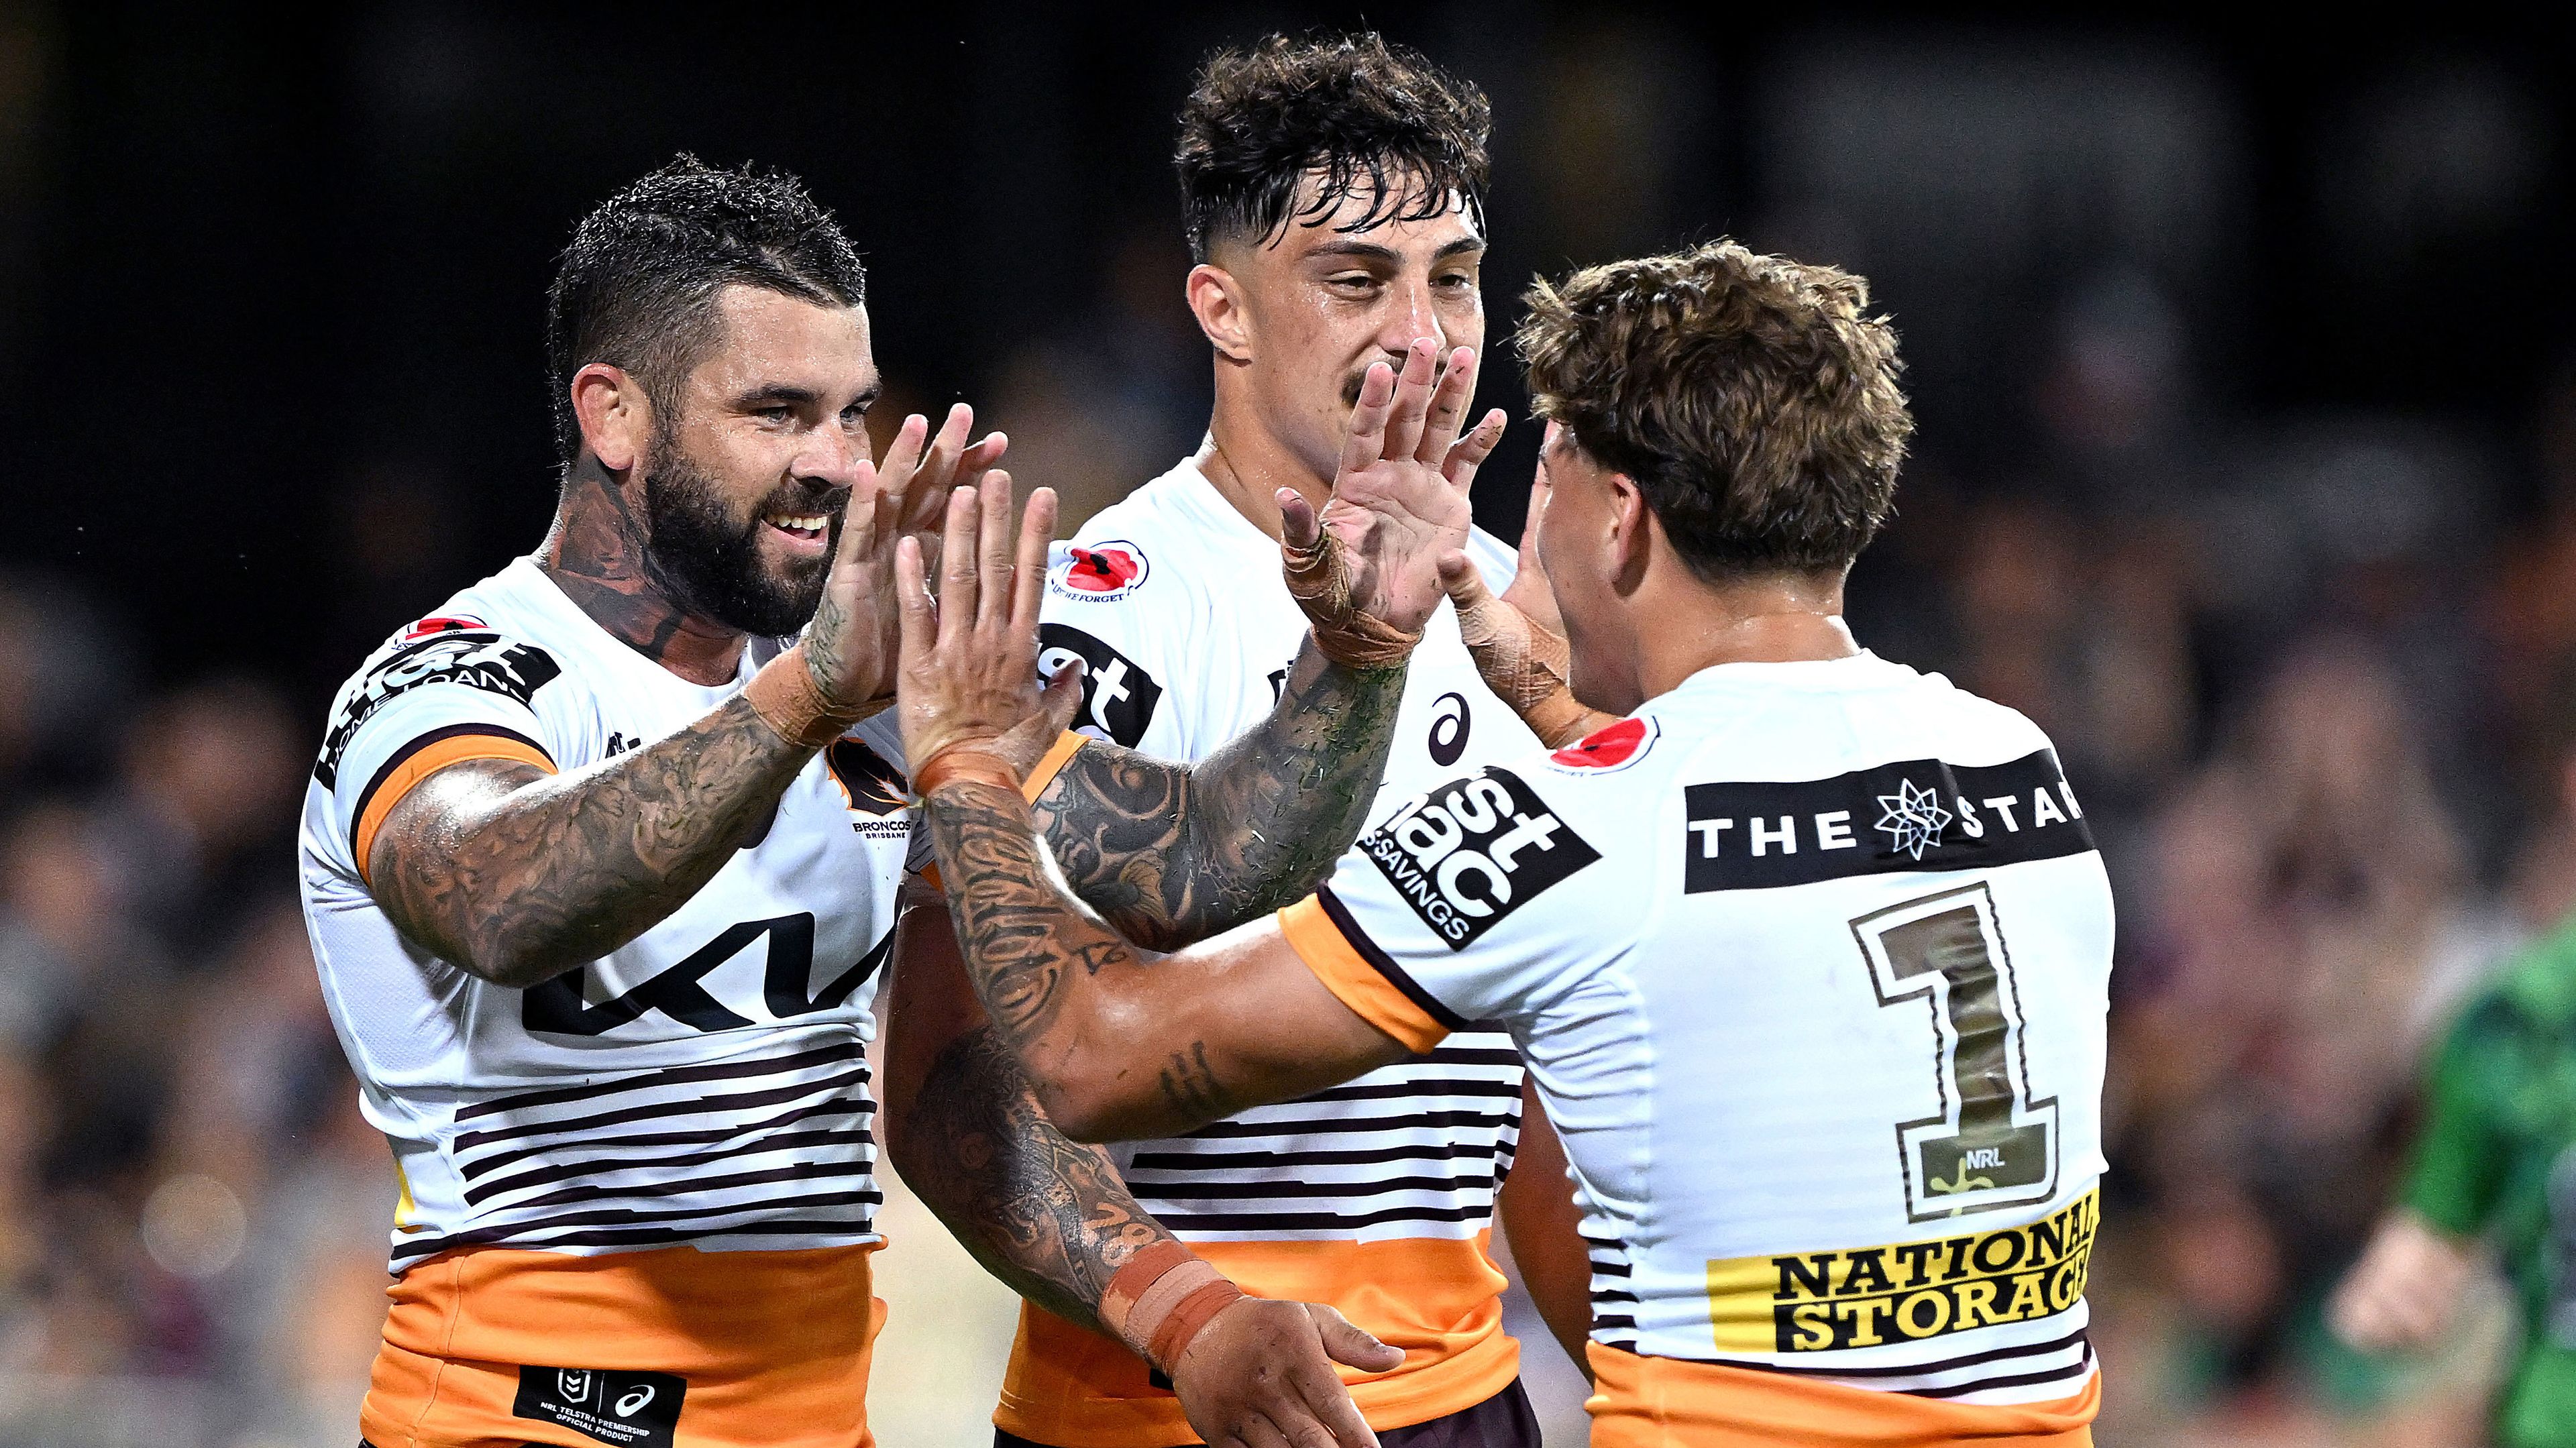 Broncos star Adam Reynolds is congratulated by teammates after scoring a try against the Eels in round eight.